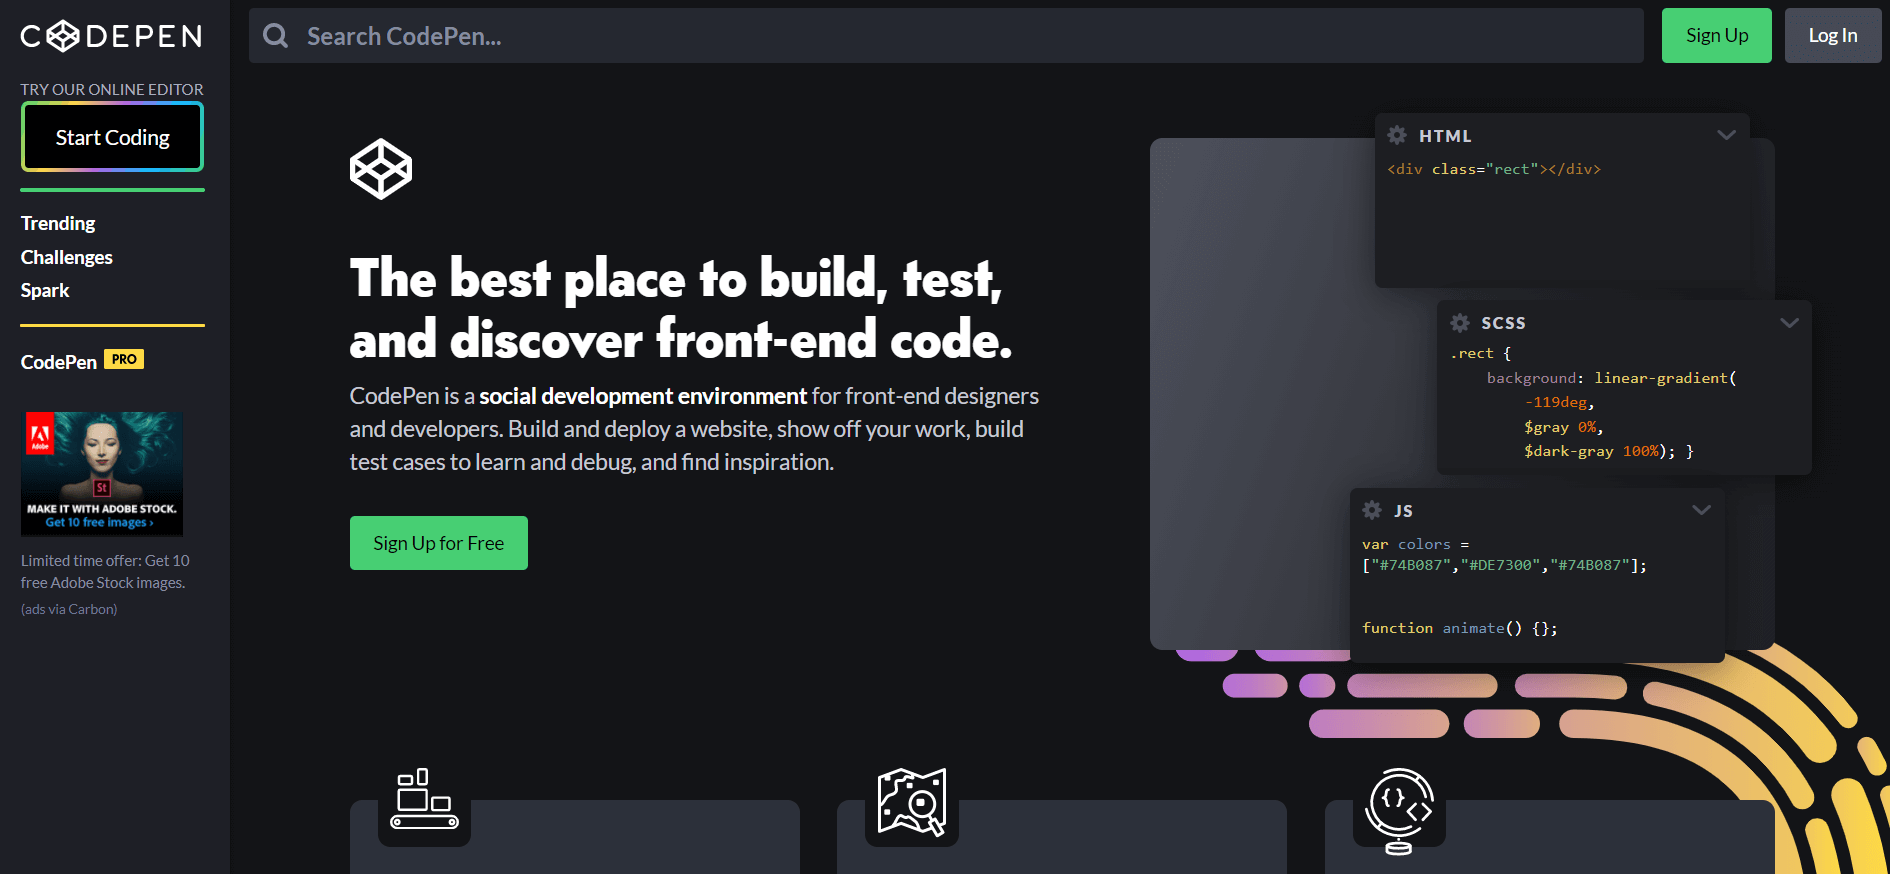 CodePen - The Best Online Code Editor & Open-source Learning Environment